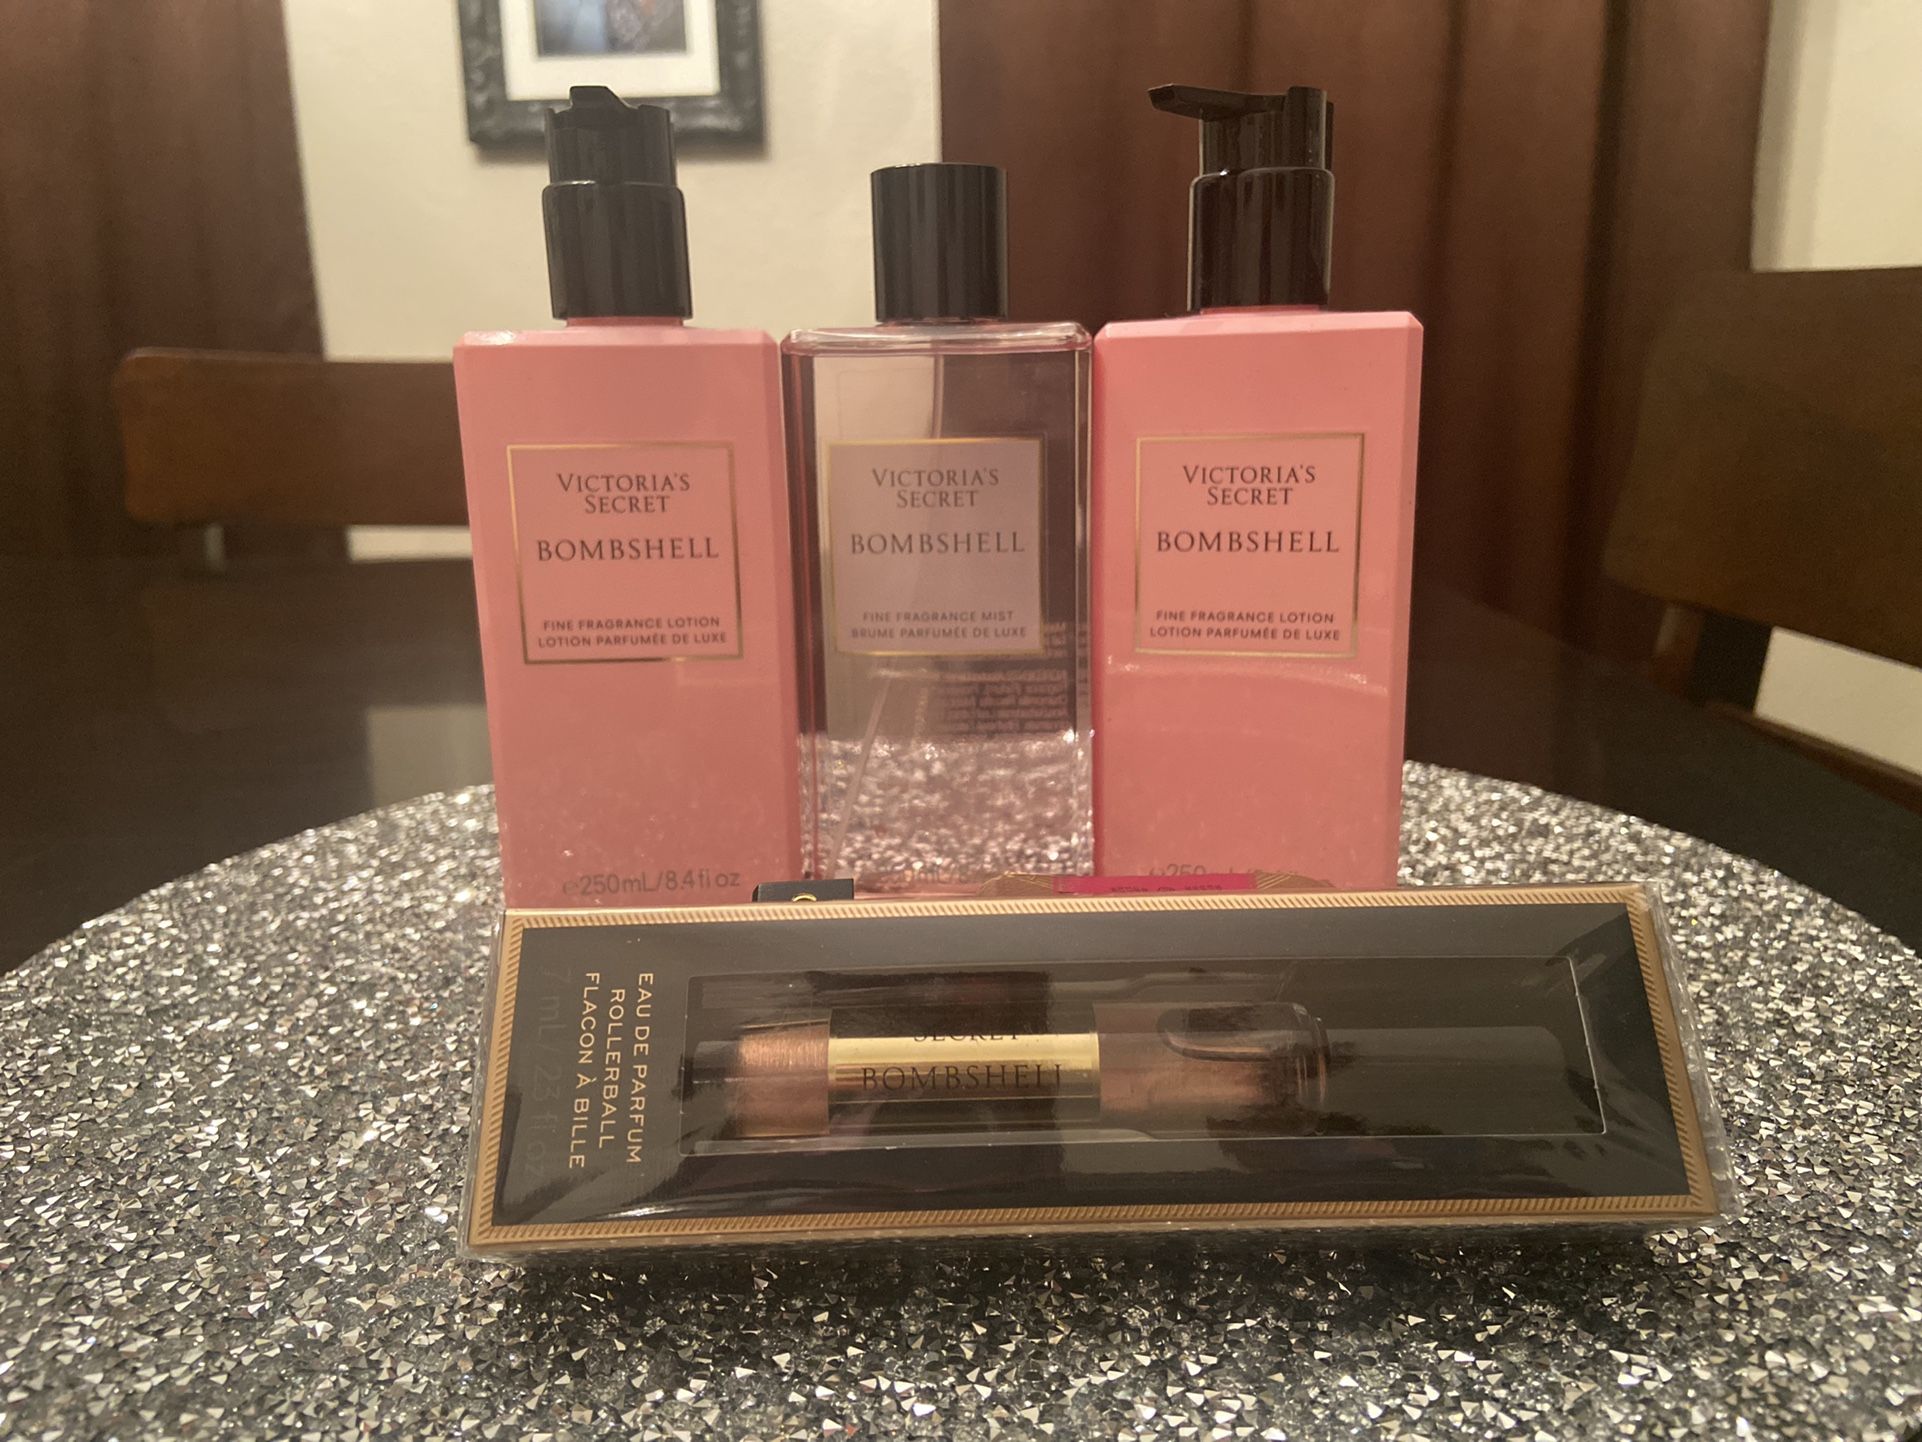 4 VICTORIA’S SECRET BEAUTY PRODUCTS - ALL FOR $80